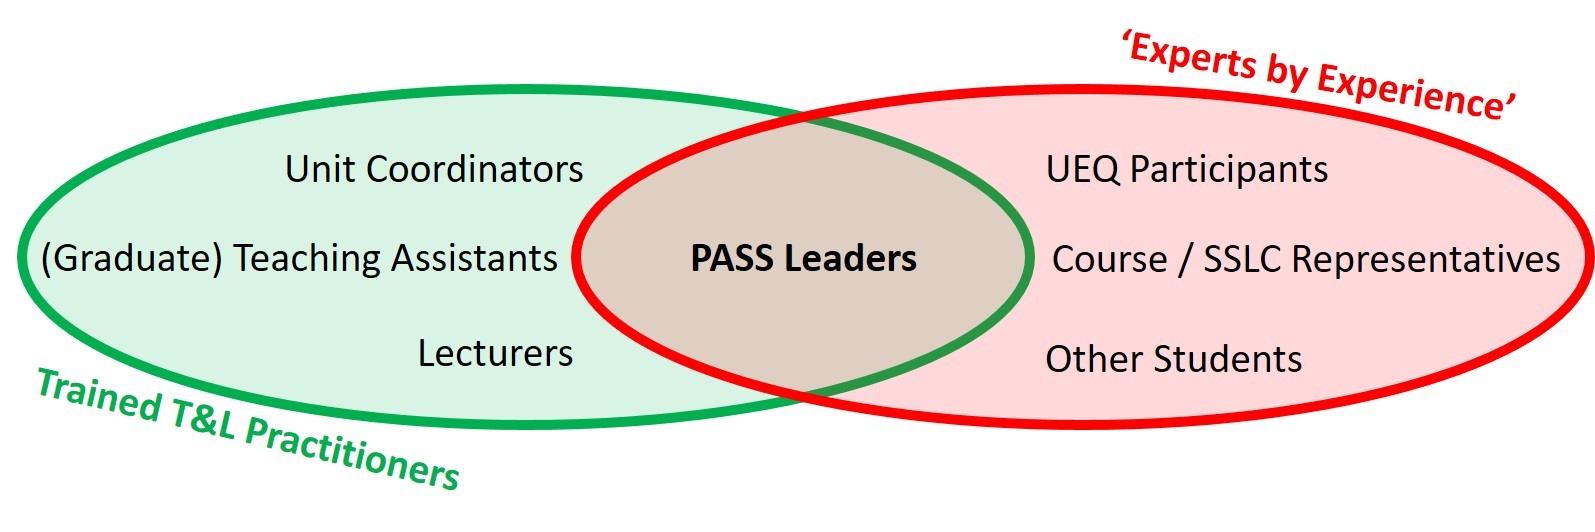 PASS scheme model produced by Dr Nick Weise 